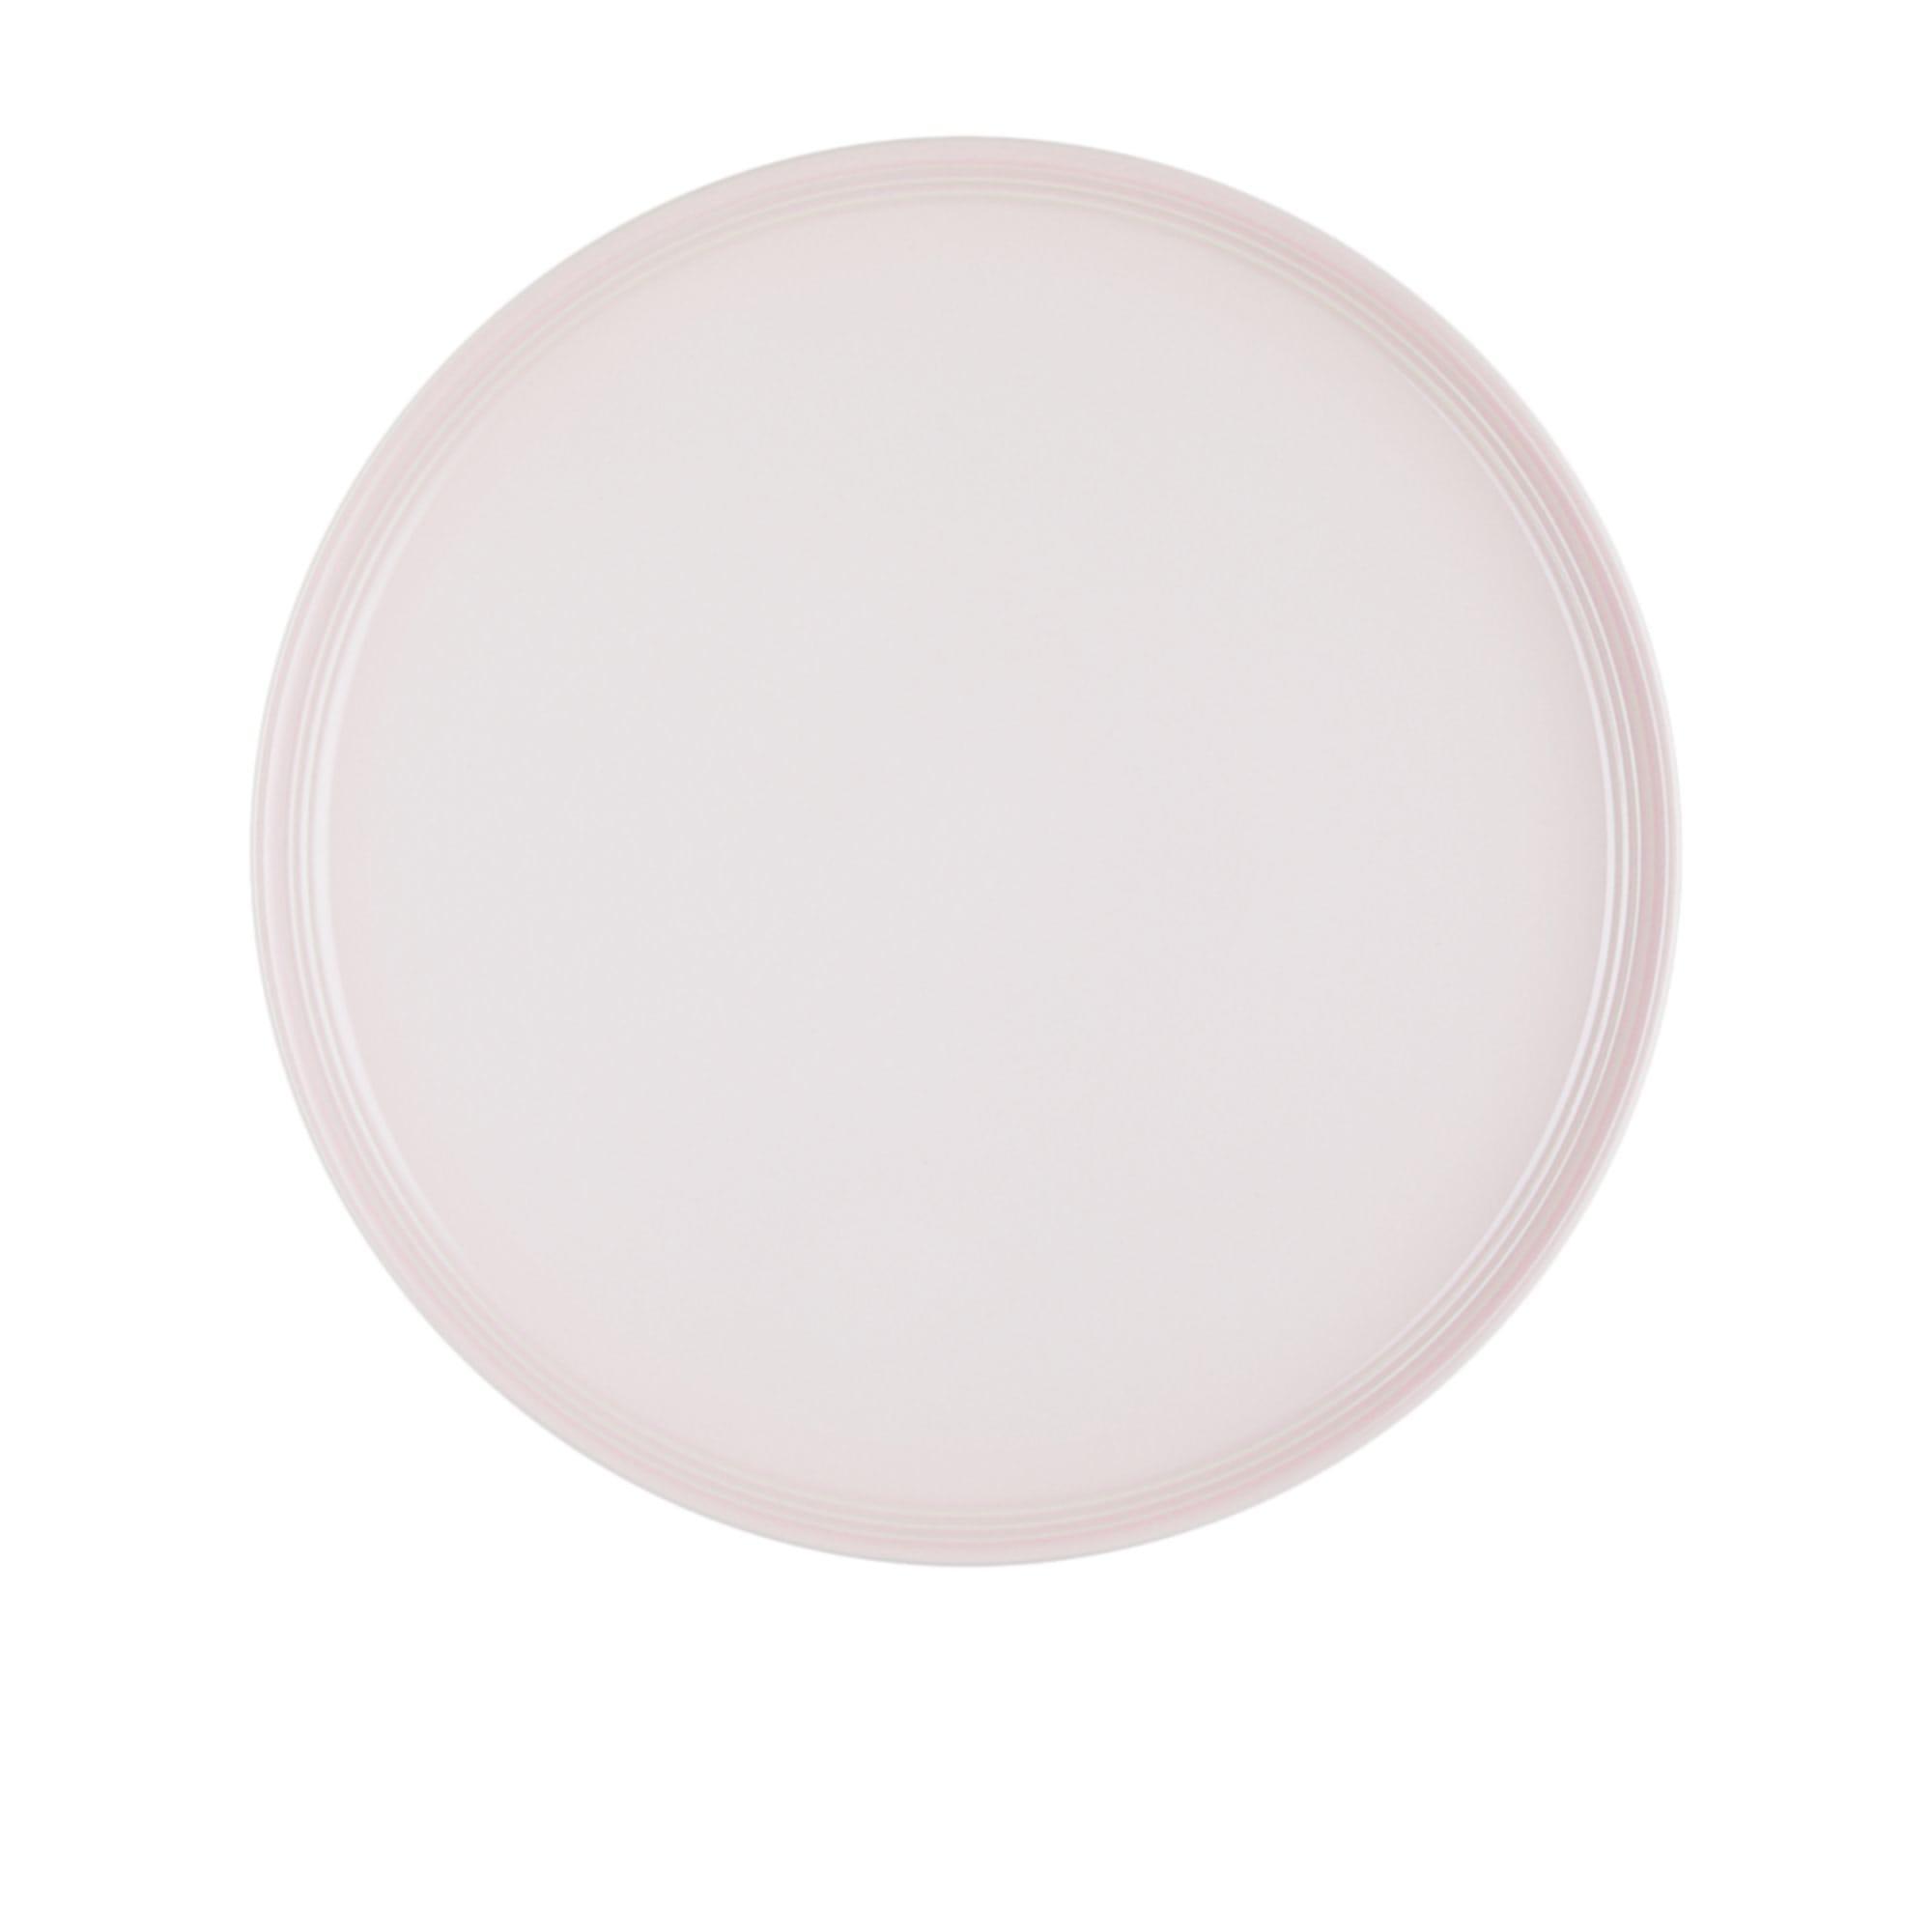 Le Creuset Stoneware Coupe Dinner Plate 27cm Shell Pink Image 1